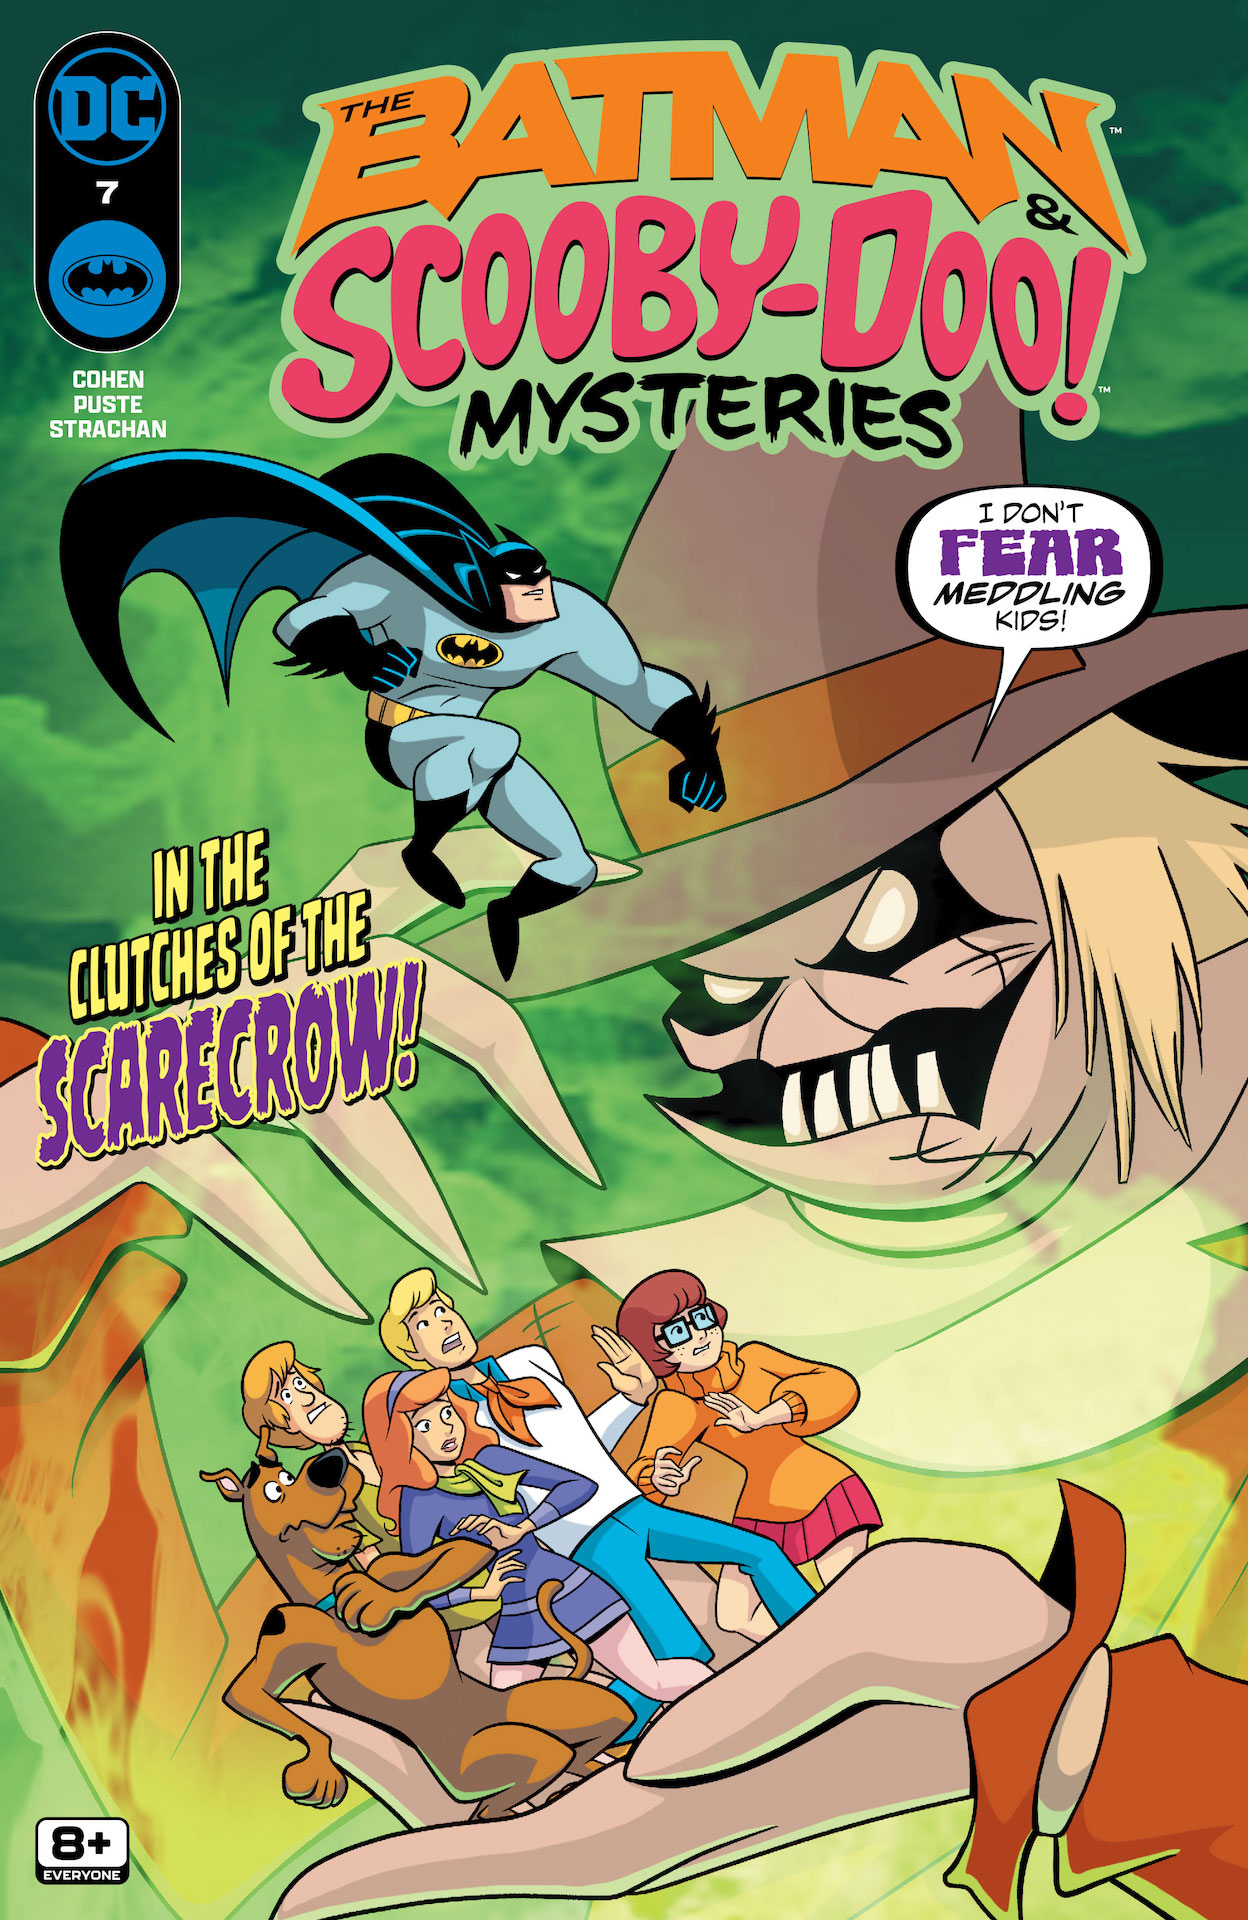 DC Preview: The Batman & Scooby-Doo Mysteries #7